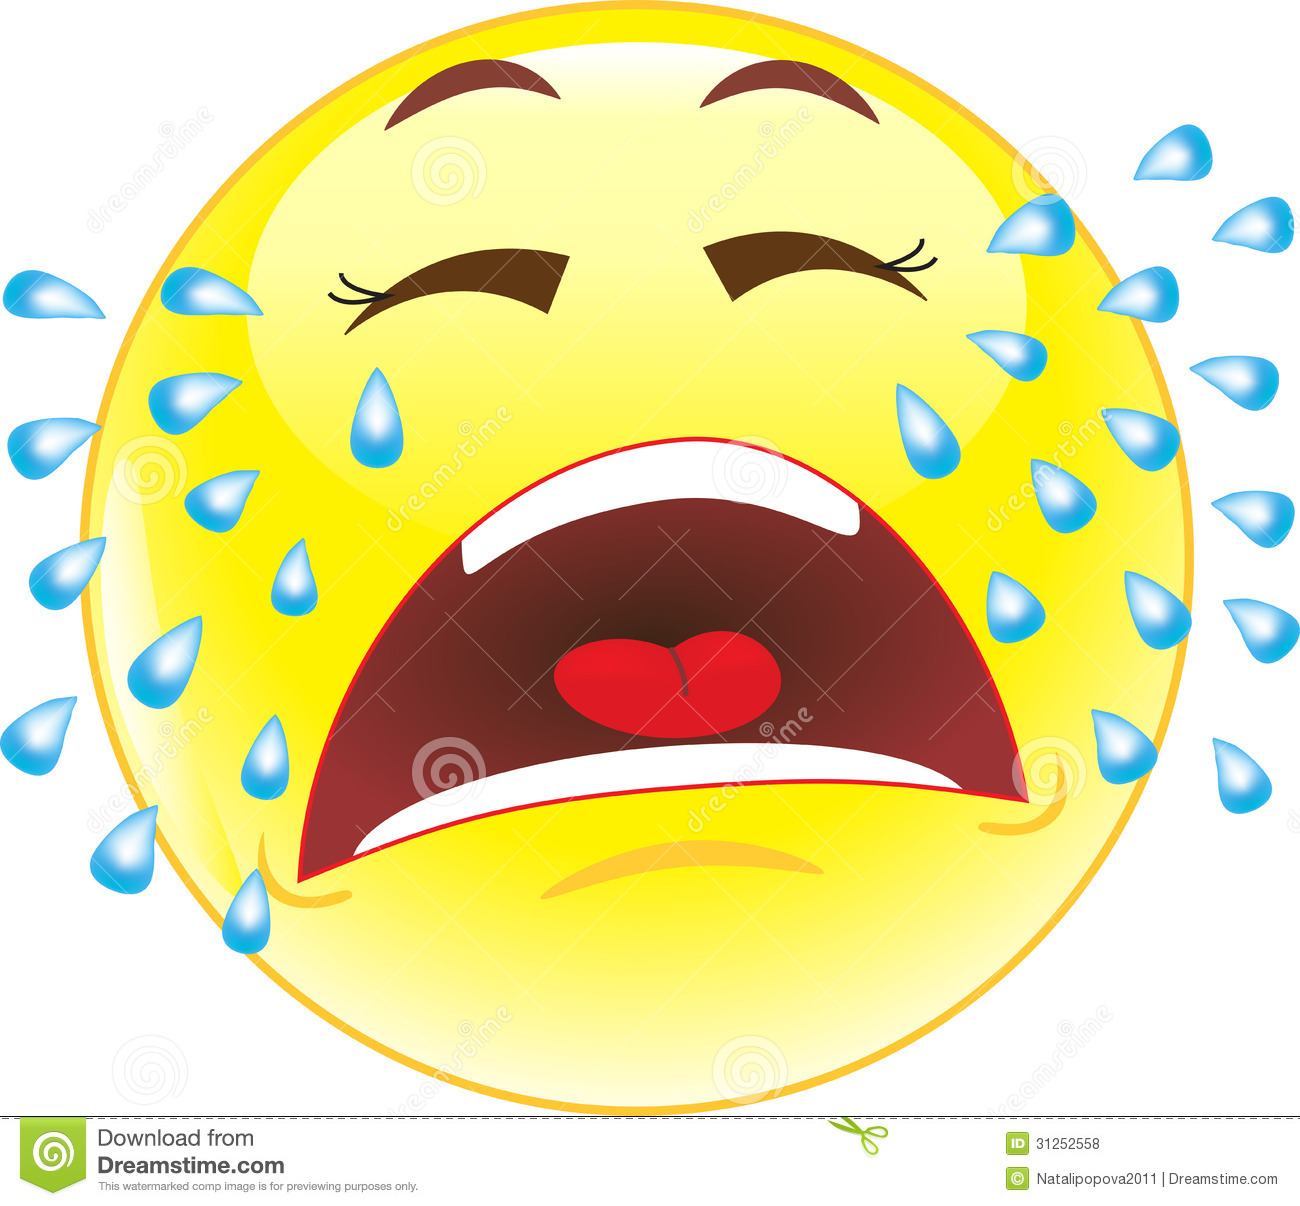 Crying Smiley  Emotions  Royalty Free Stock Photos   Image  31252558